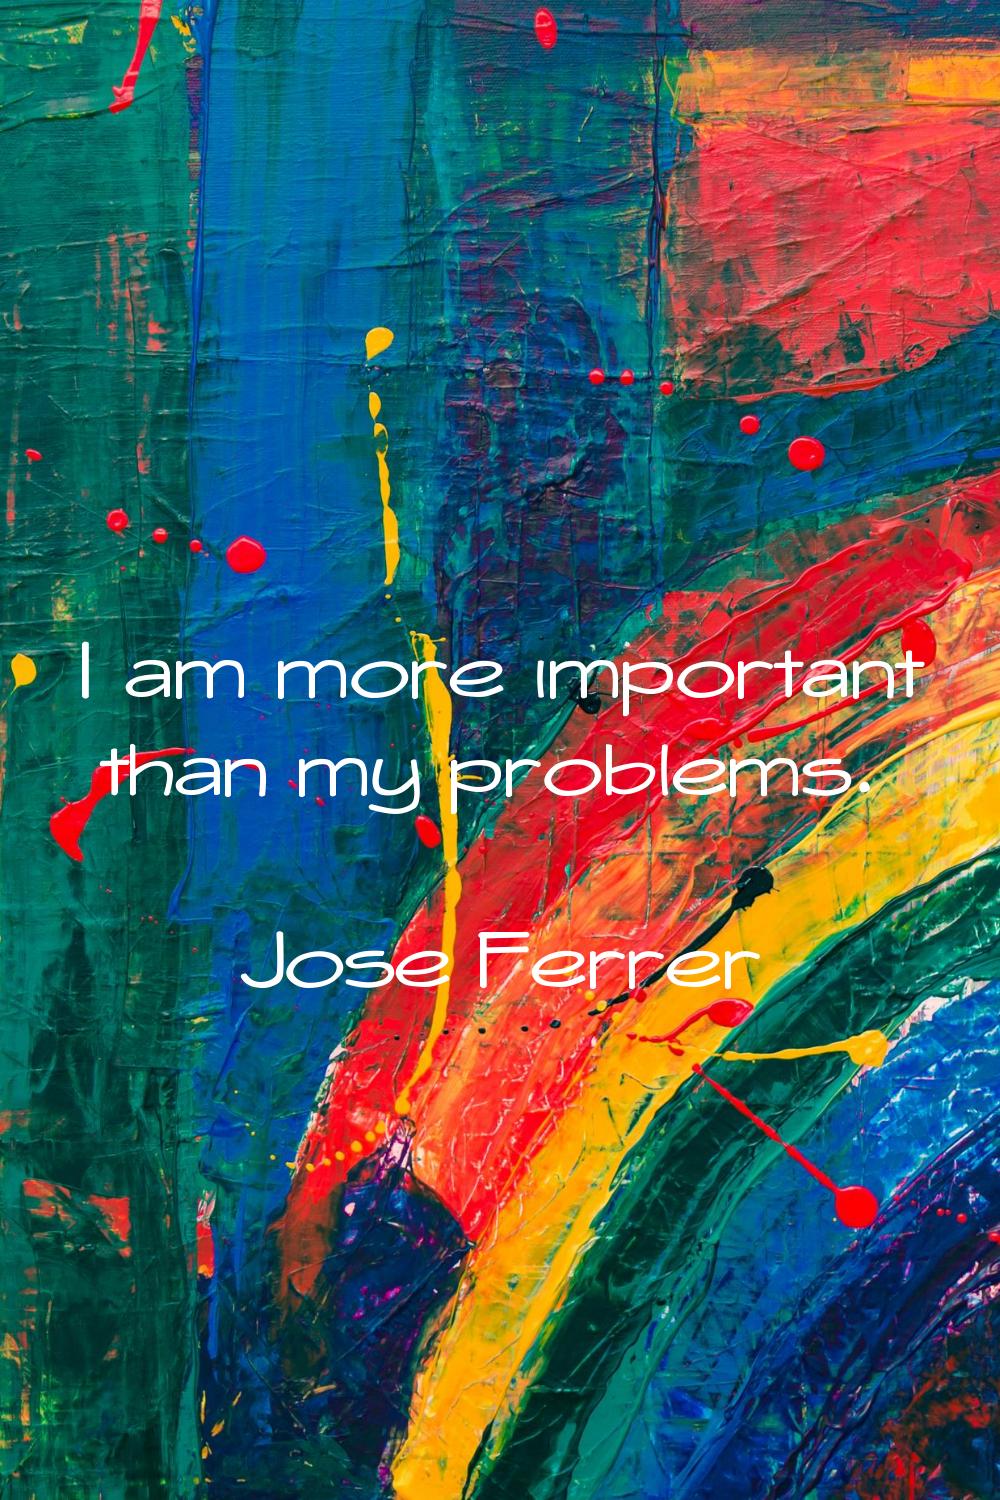 I am more important than my problems.